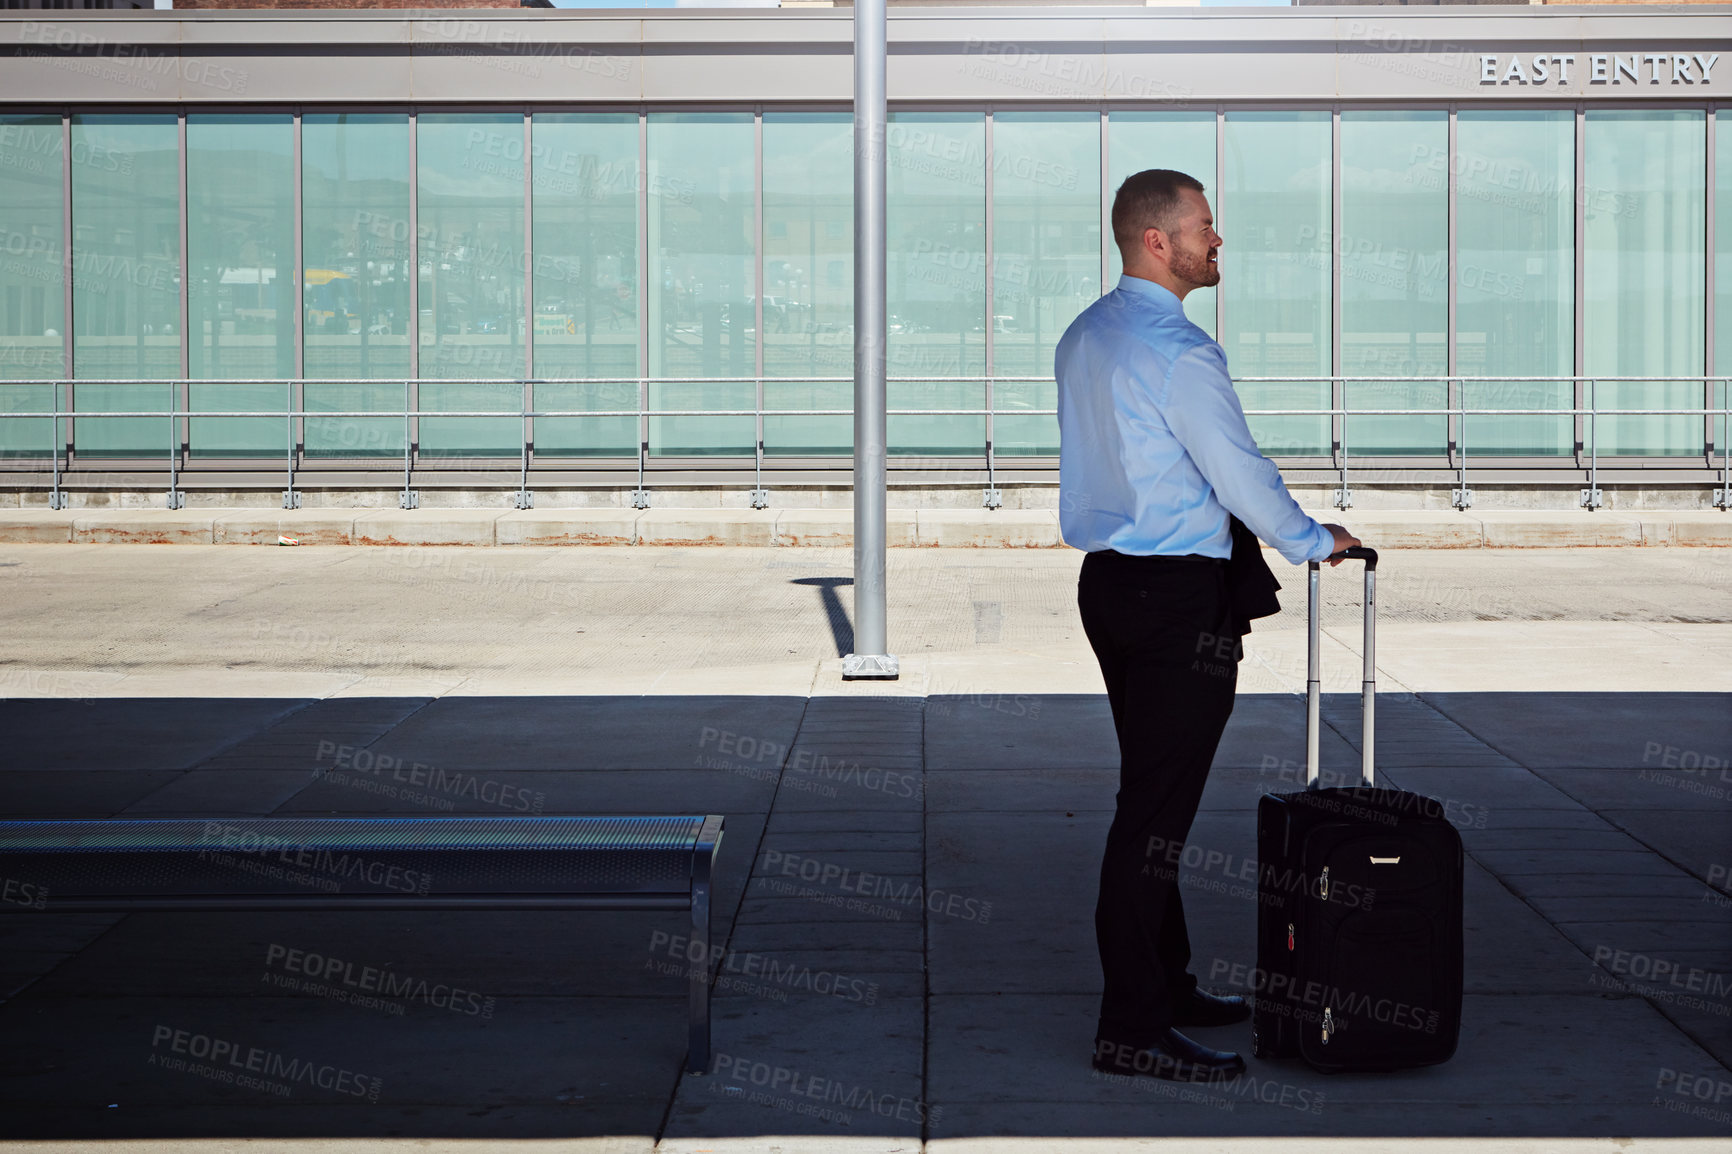 Buy stock photo Shot of a professional businessman waiting for transportation outside an airport